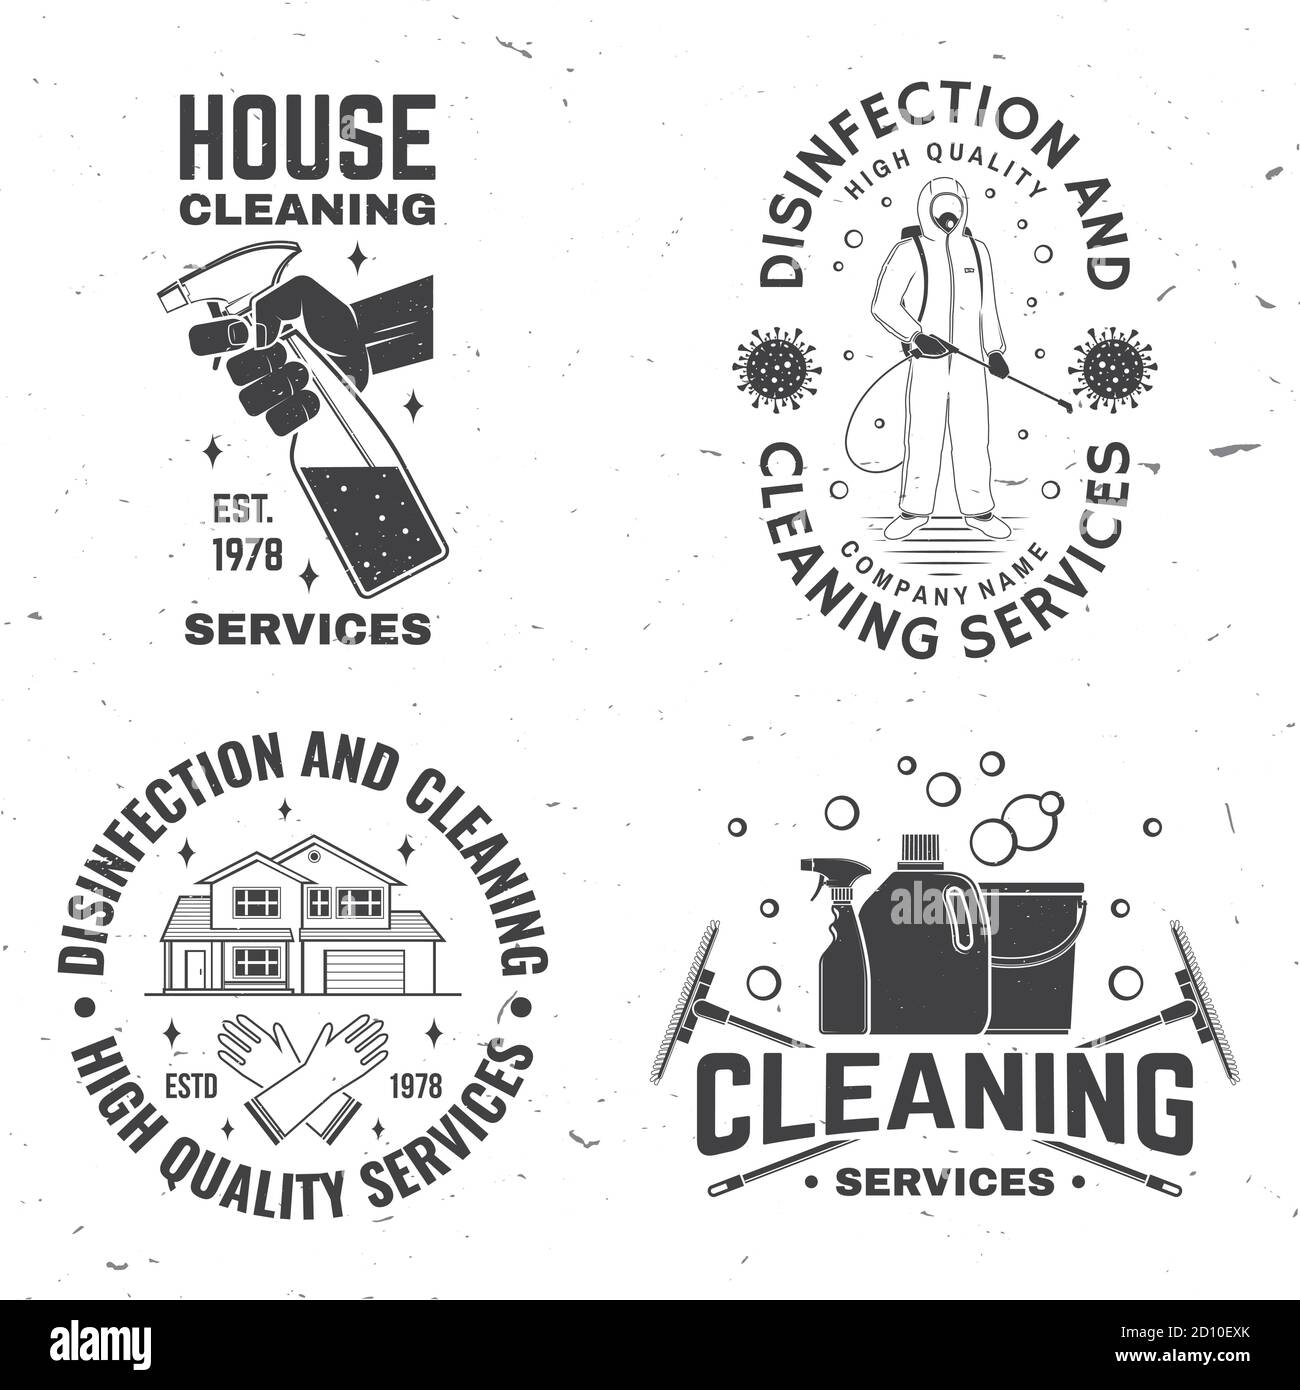 Set of Disinfection and cleaning services badge, logo, emblem. Vector. For professional disinfection and cleaning company. Vintage typography design with disinfectant and cleaning equipments Stock Vector